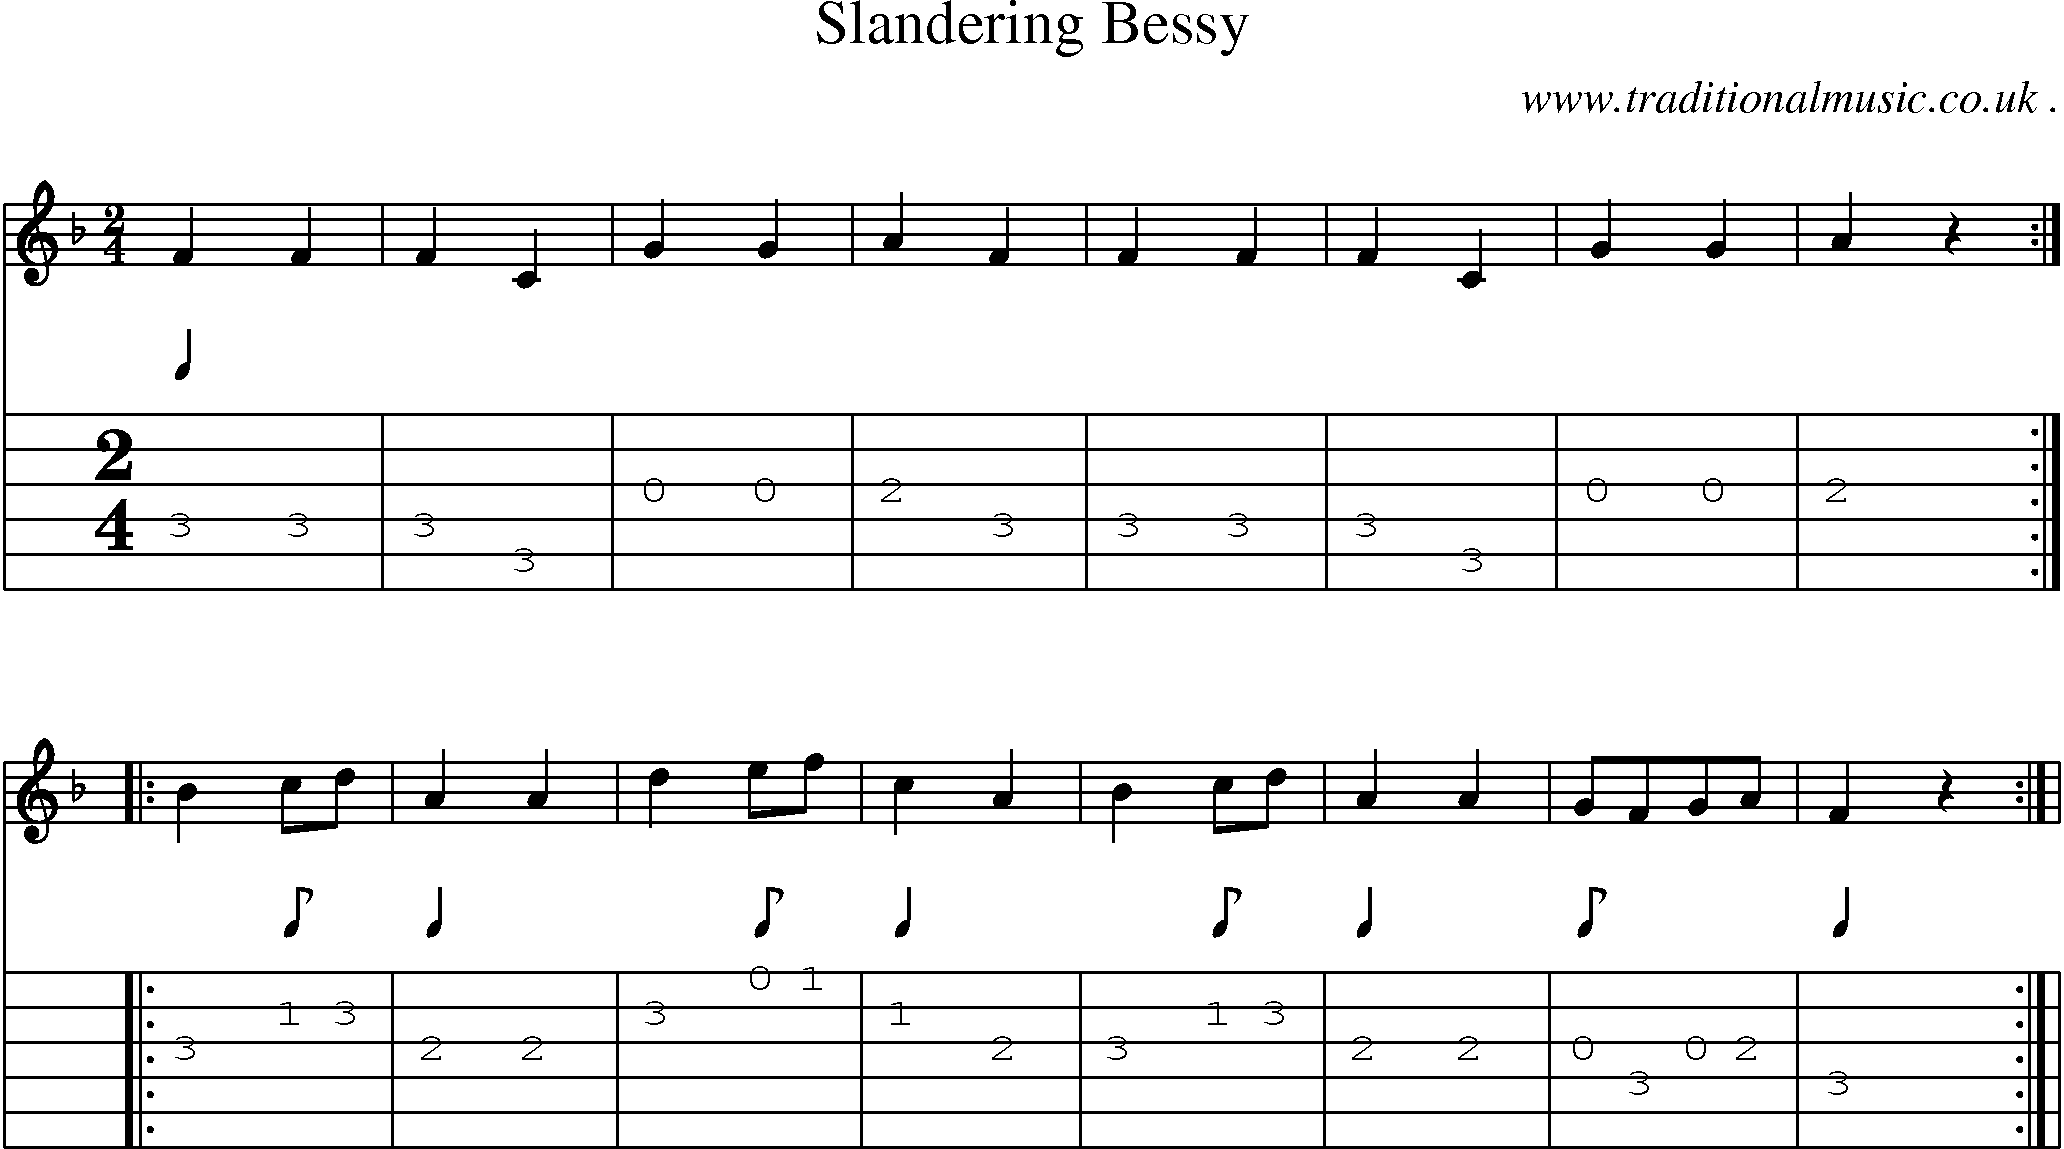 Sheet-Music and Guitar Tabs for Slandering Bessy